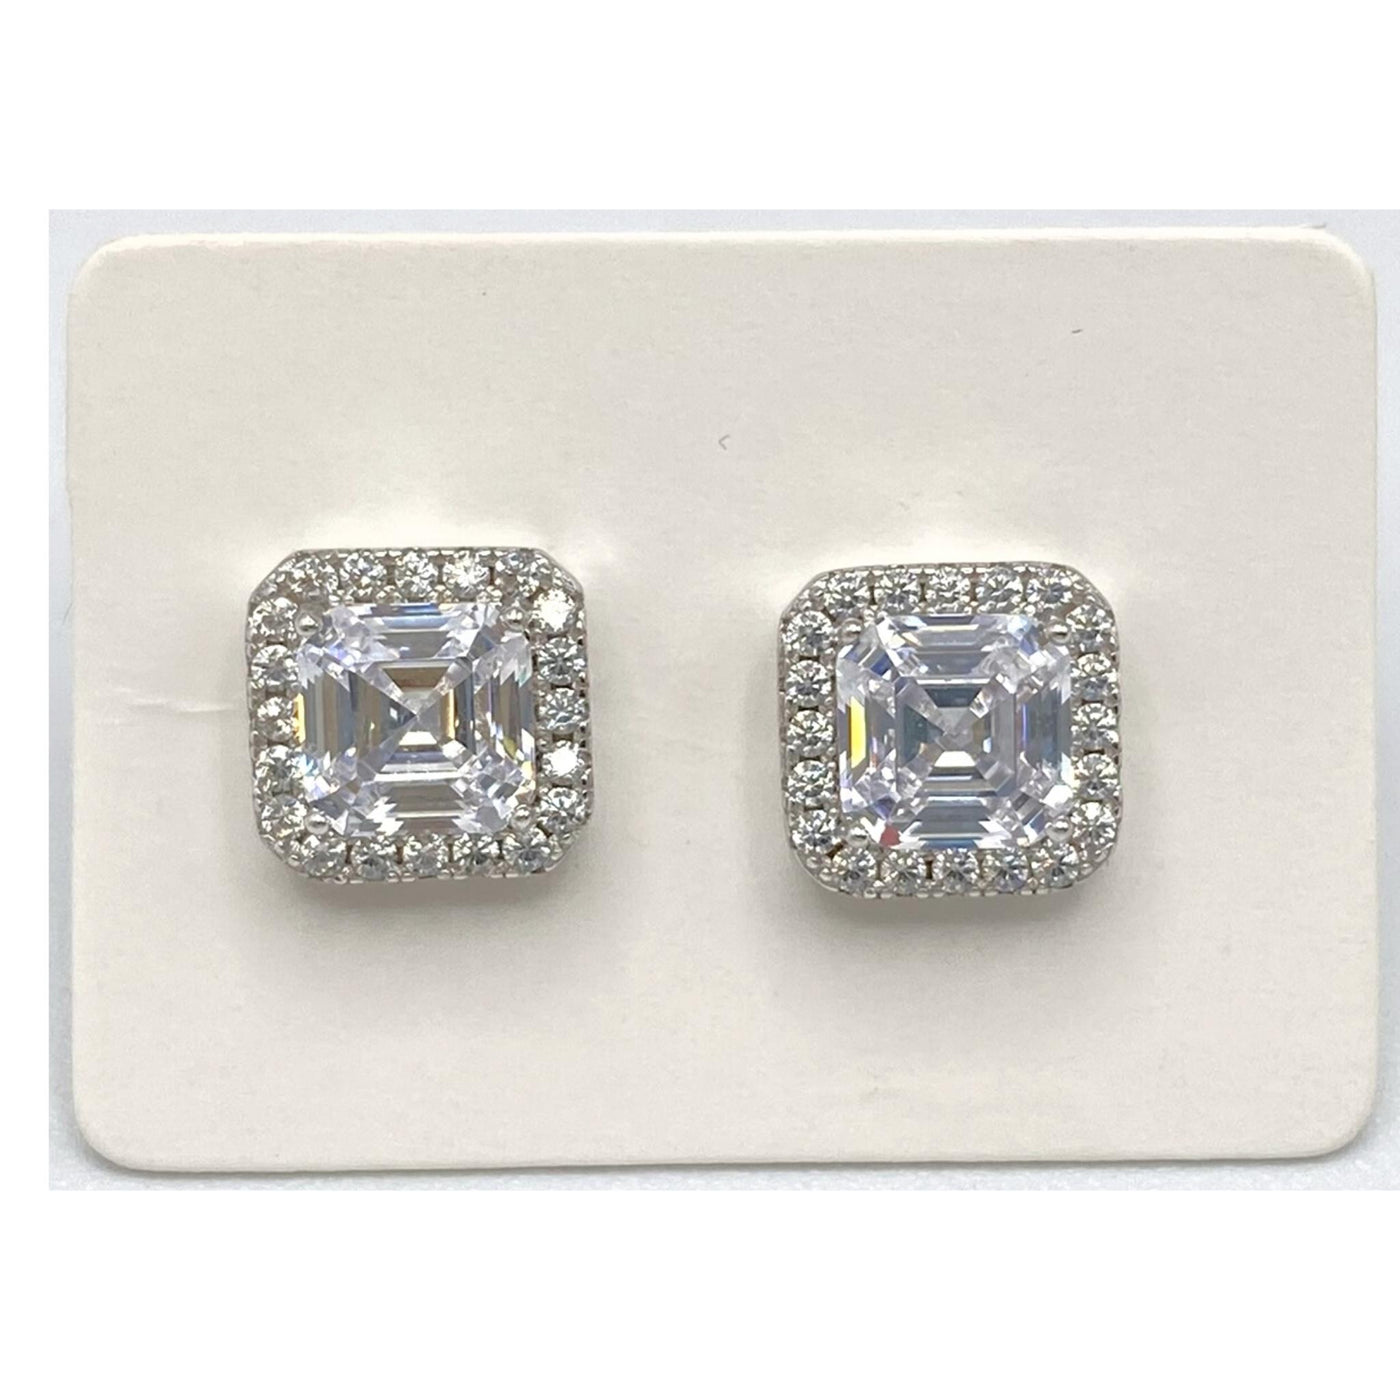 Pack of 5 silver stud earrings with asscher cut stones